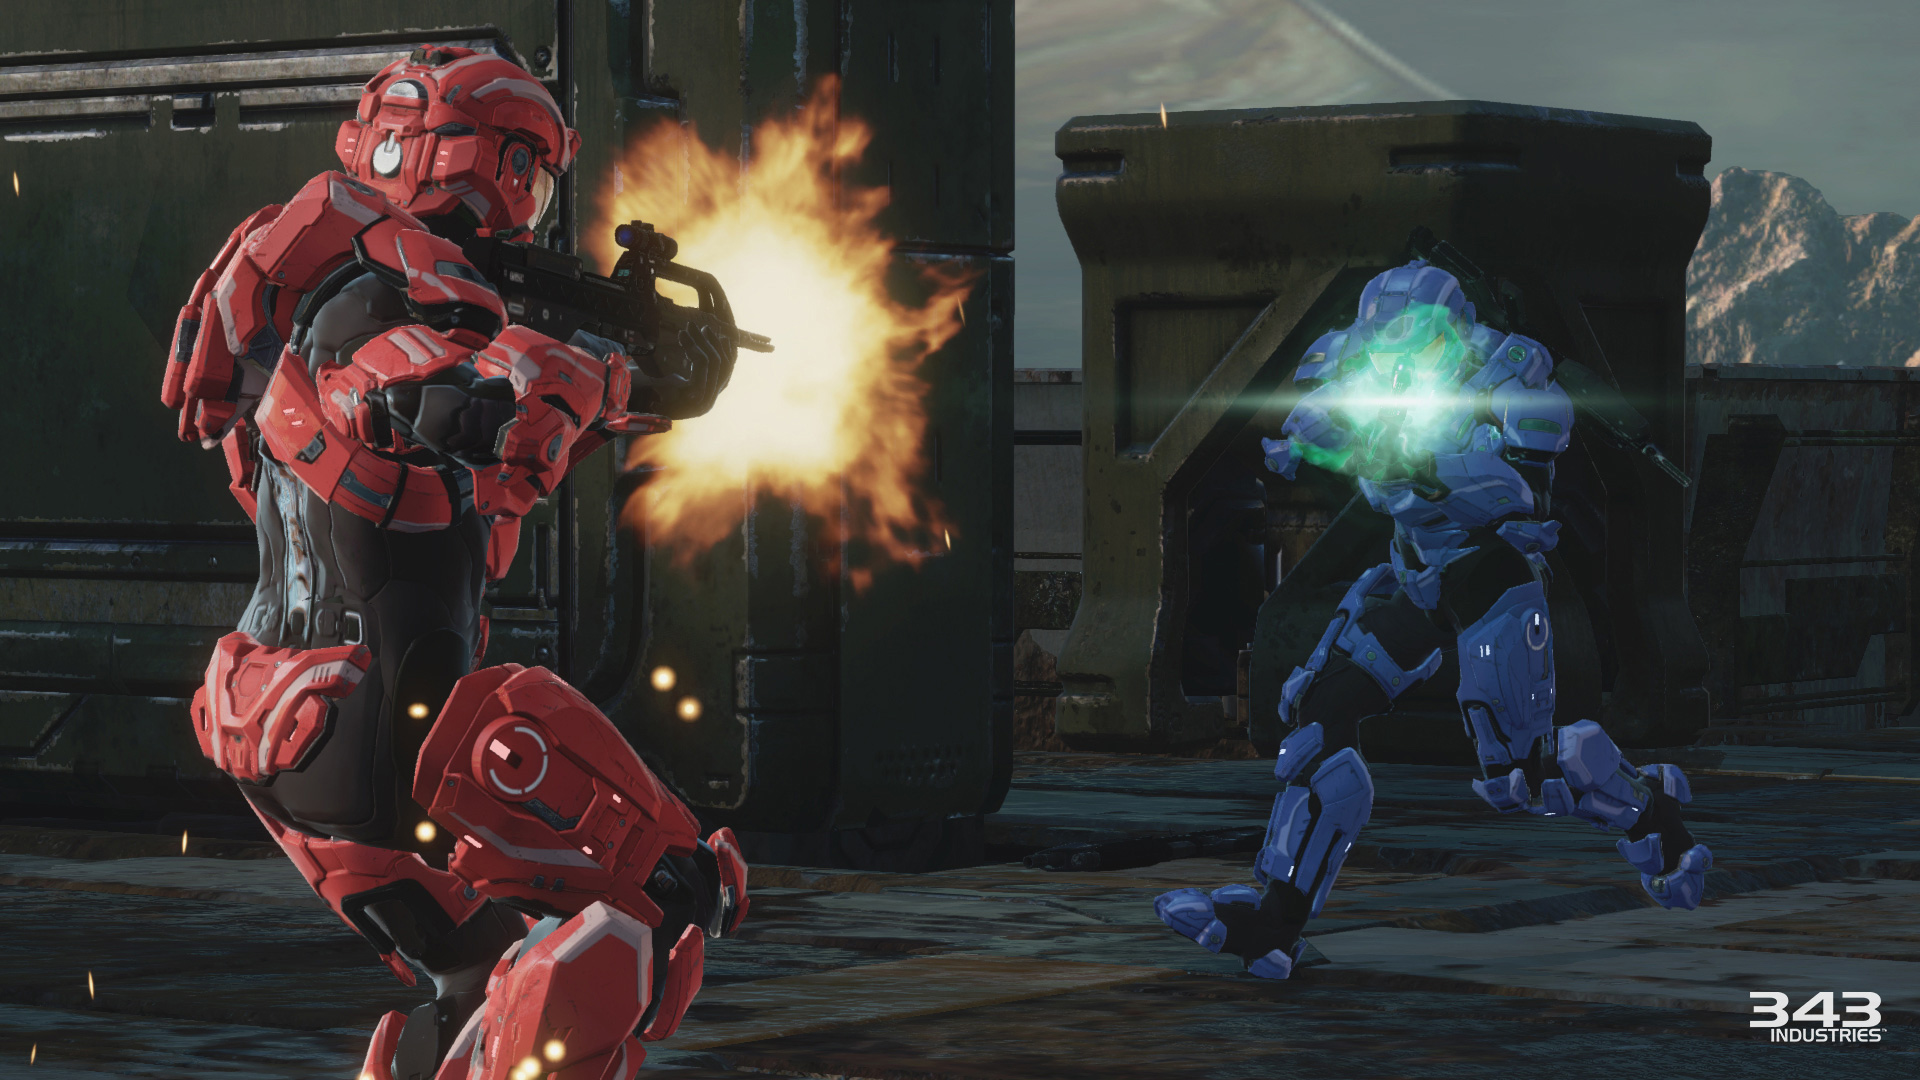 Halo: The Master Chief Collection | Games | Halo - Official Site1920 x 1080